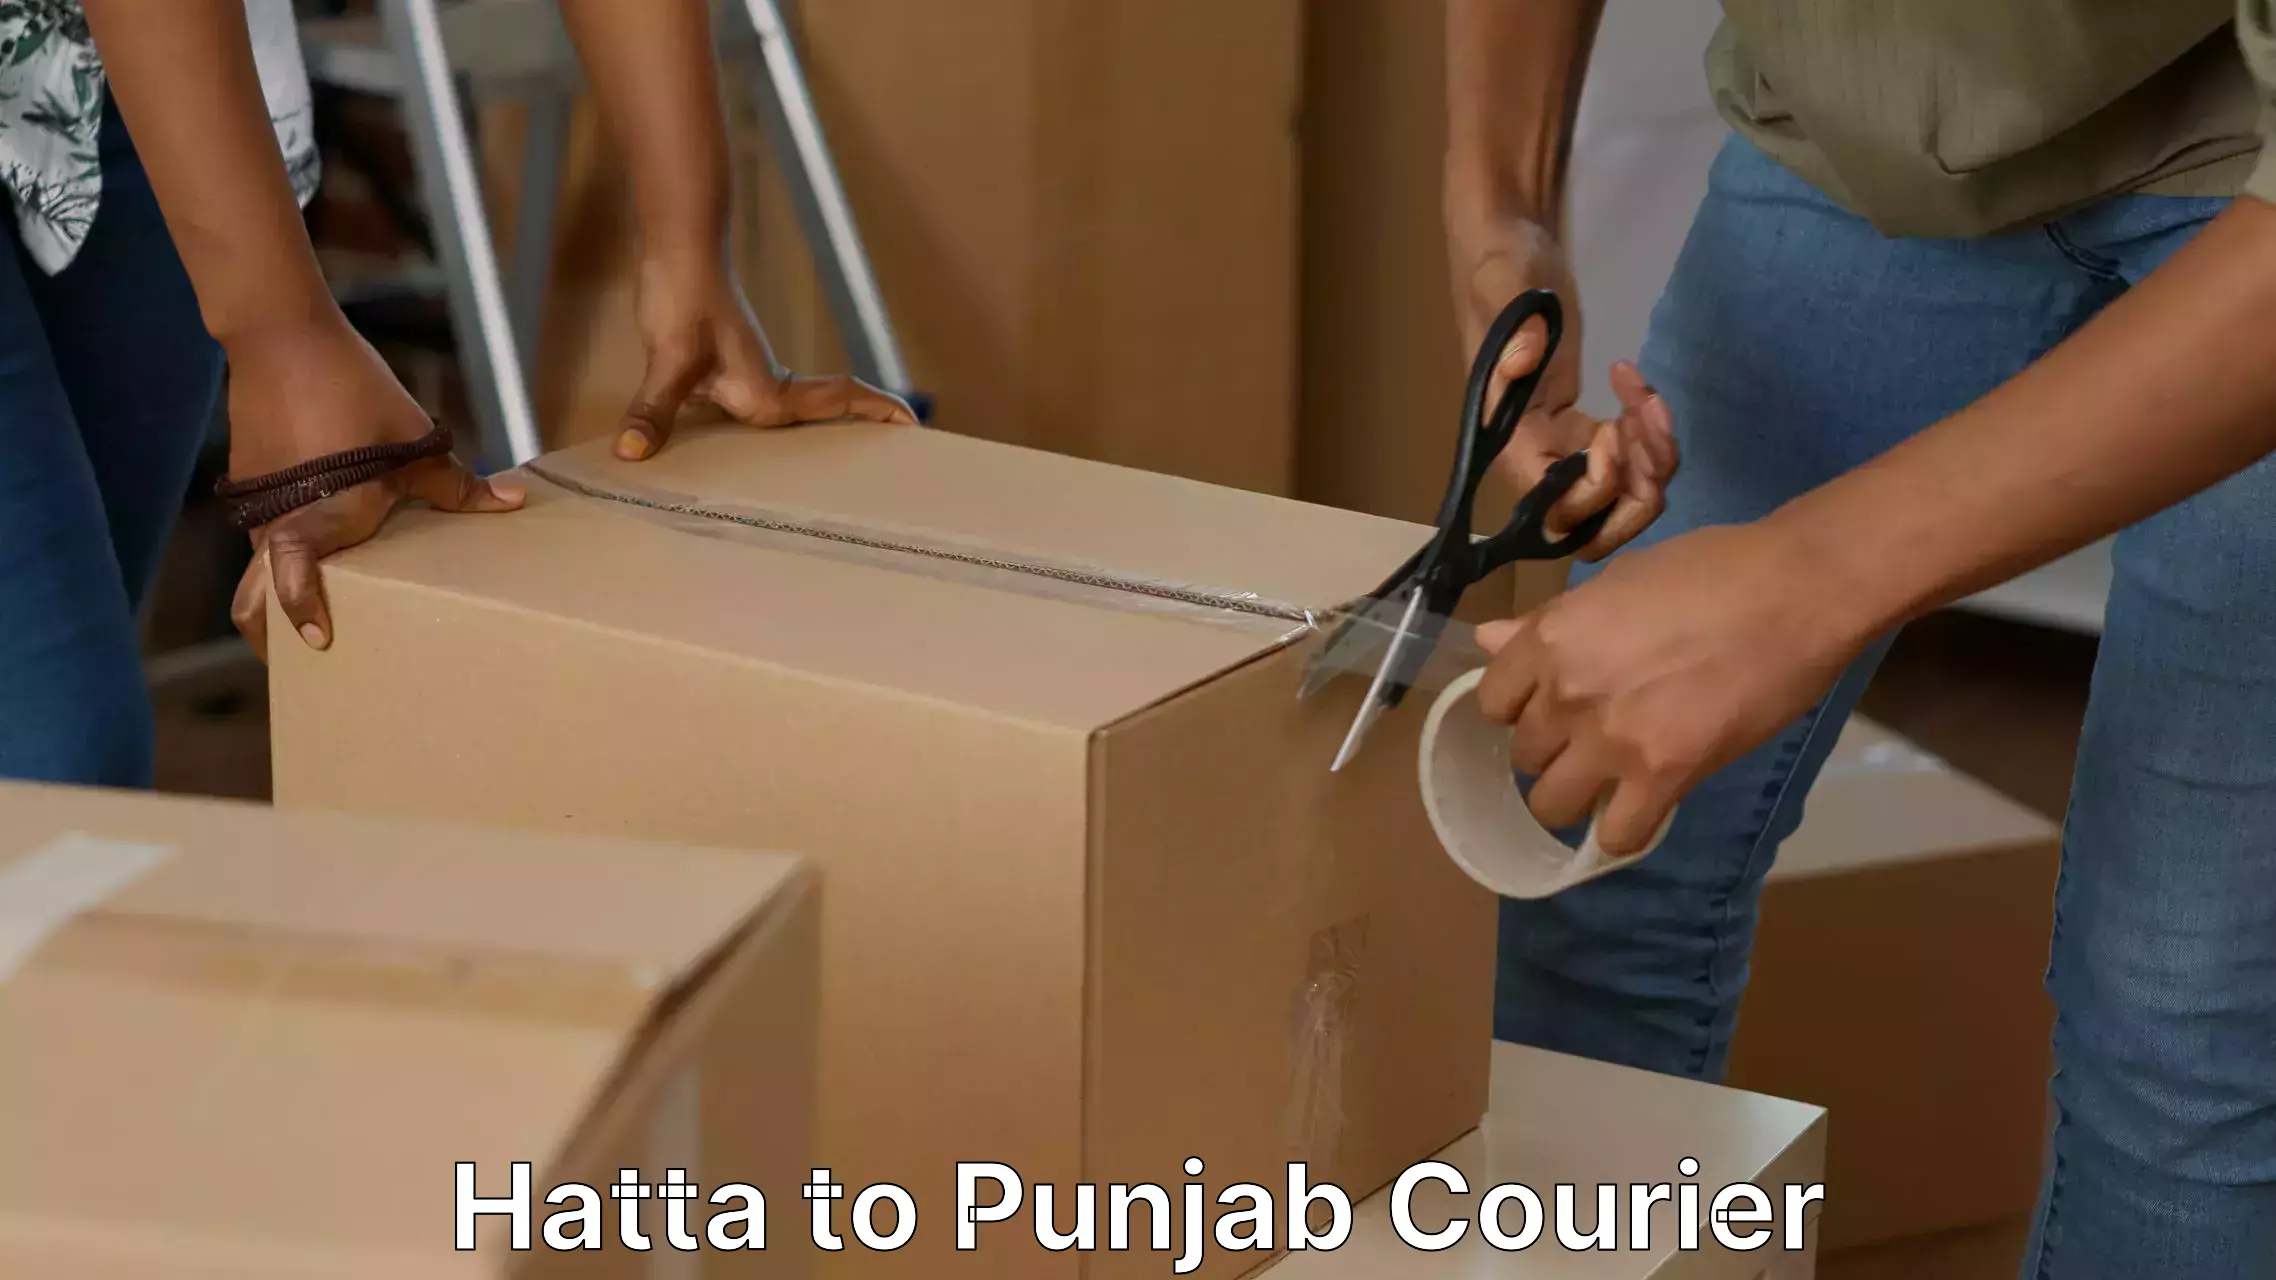 Reliable moving assistance Hatta to Punjab